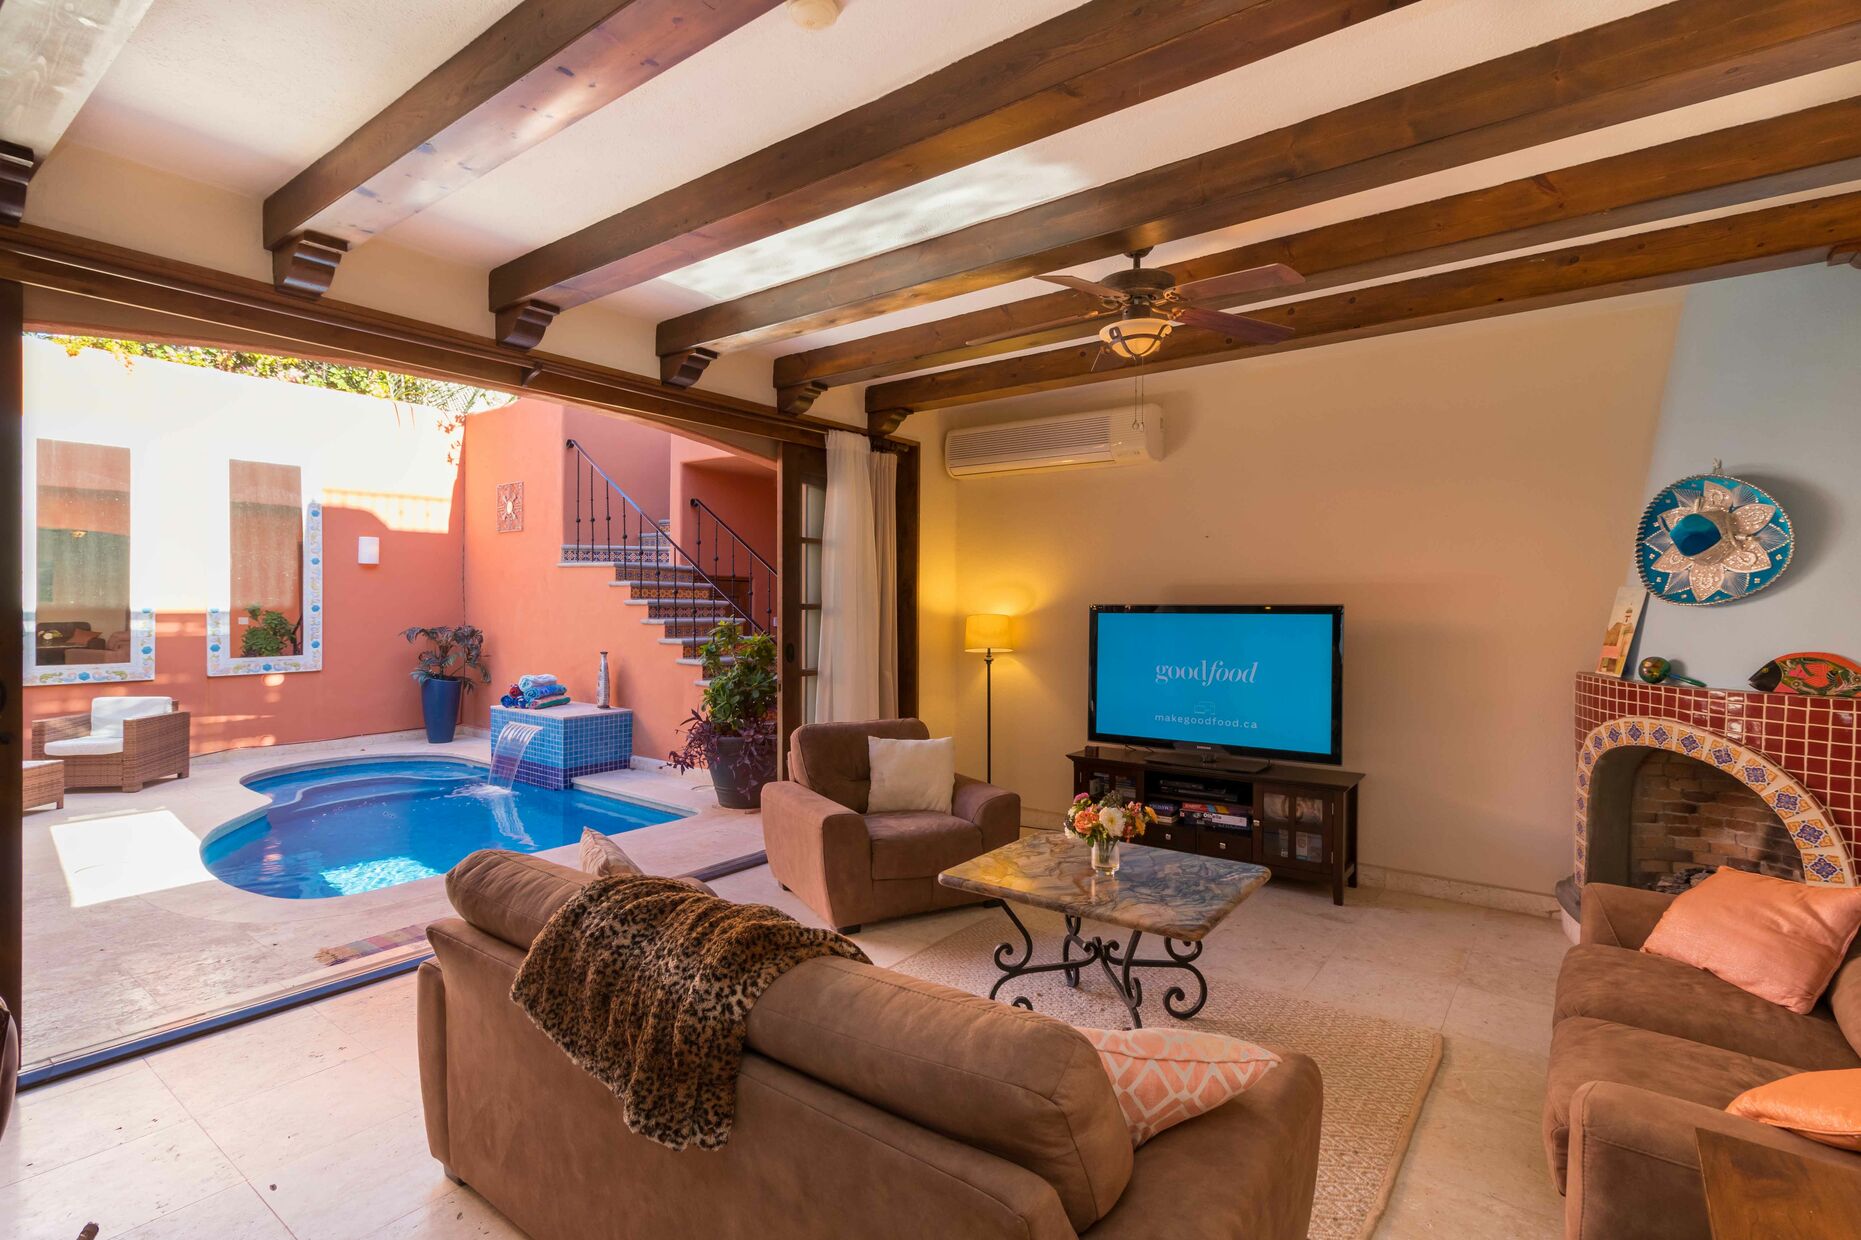 2 BD & 2.5 BR  Home with pool and minutes from the Beach of Loreto Bay